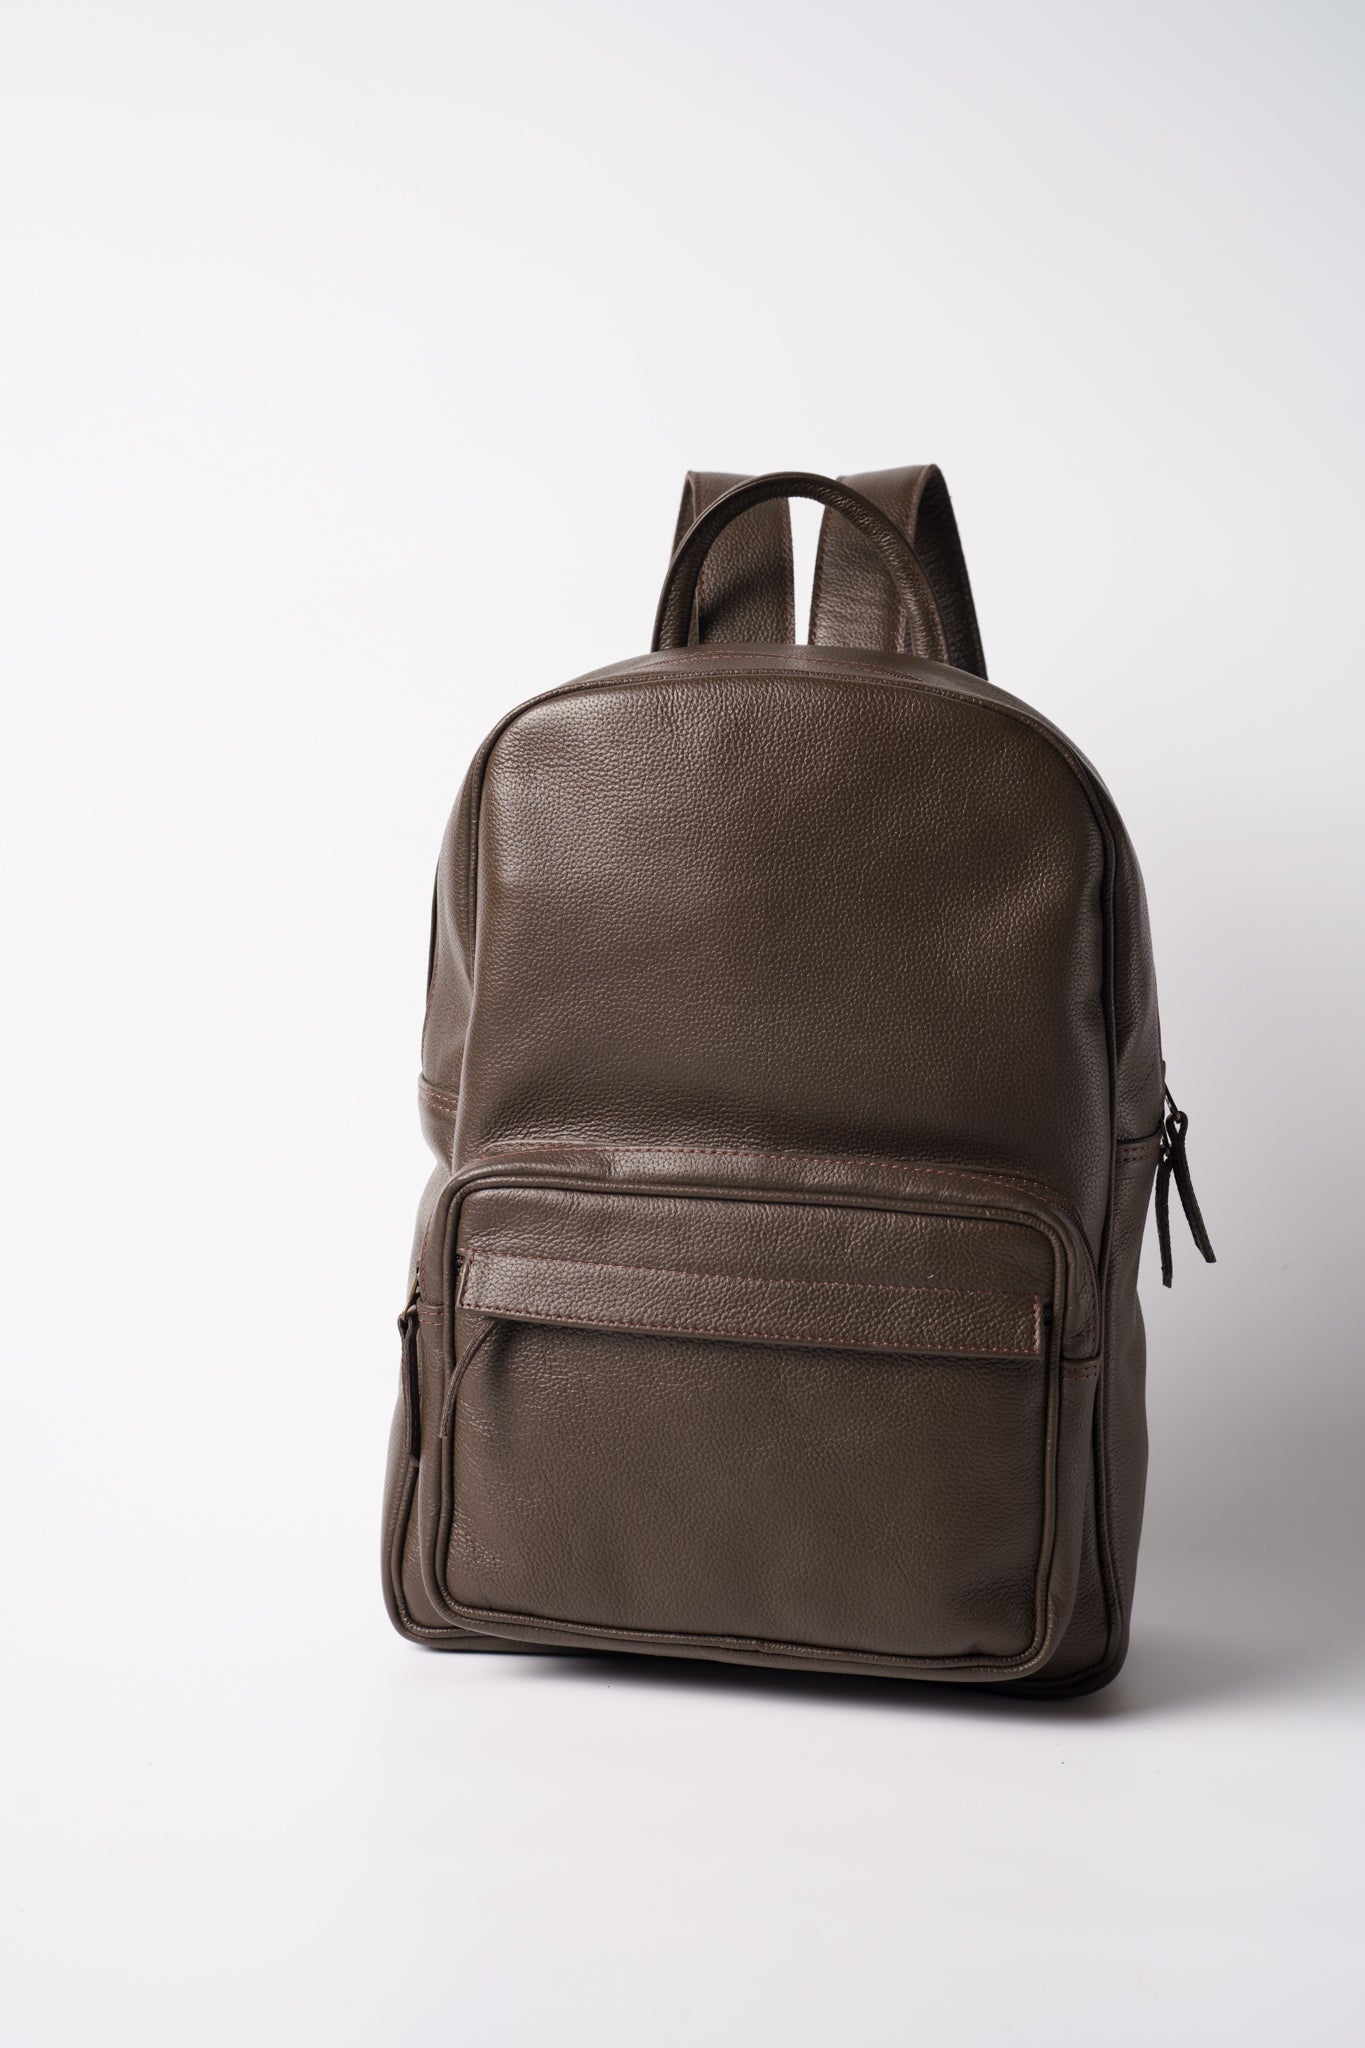 Front view of Chamra's chocolate brown leather bag with a prominent rectangular front pocket near the bottom of the bag. The image also showcases hand carry and shoulder straps.